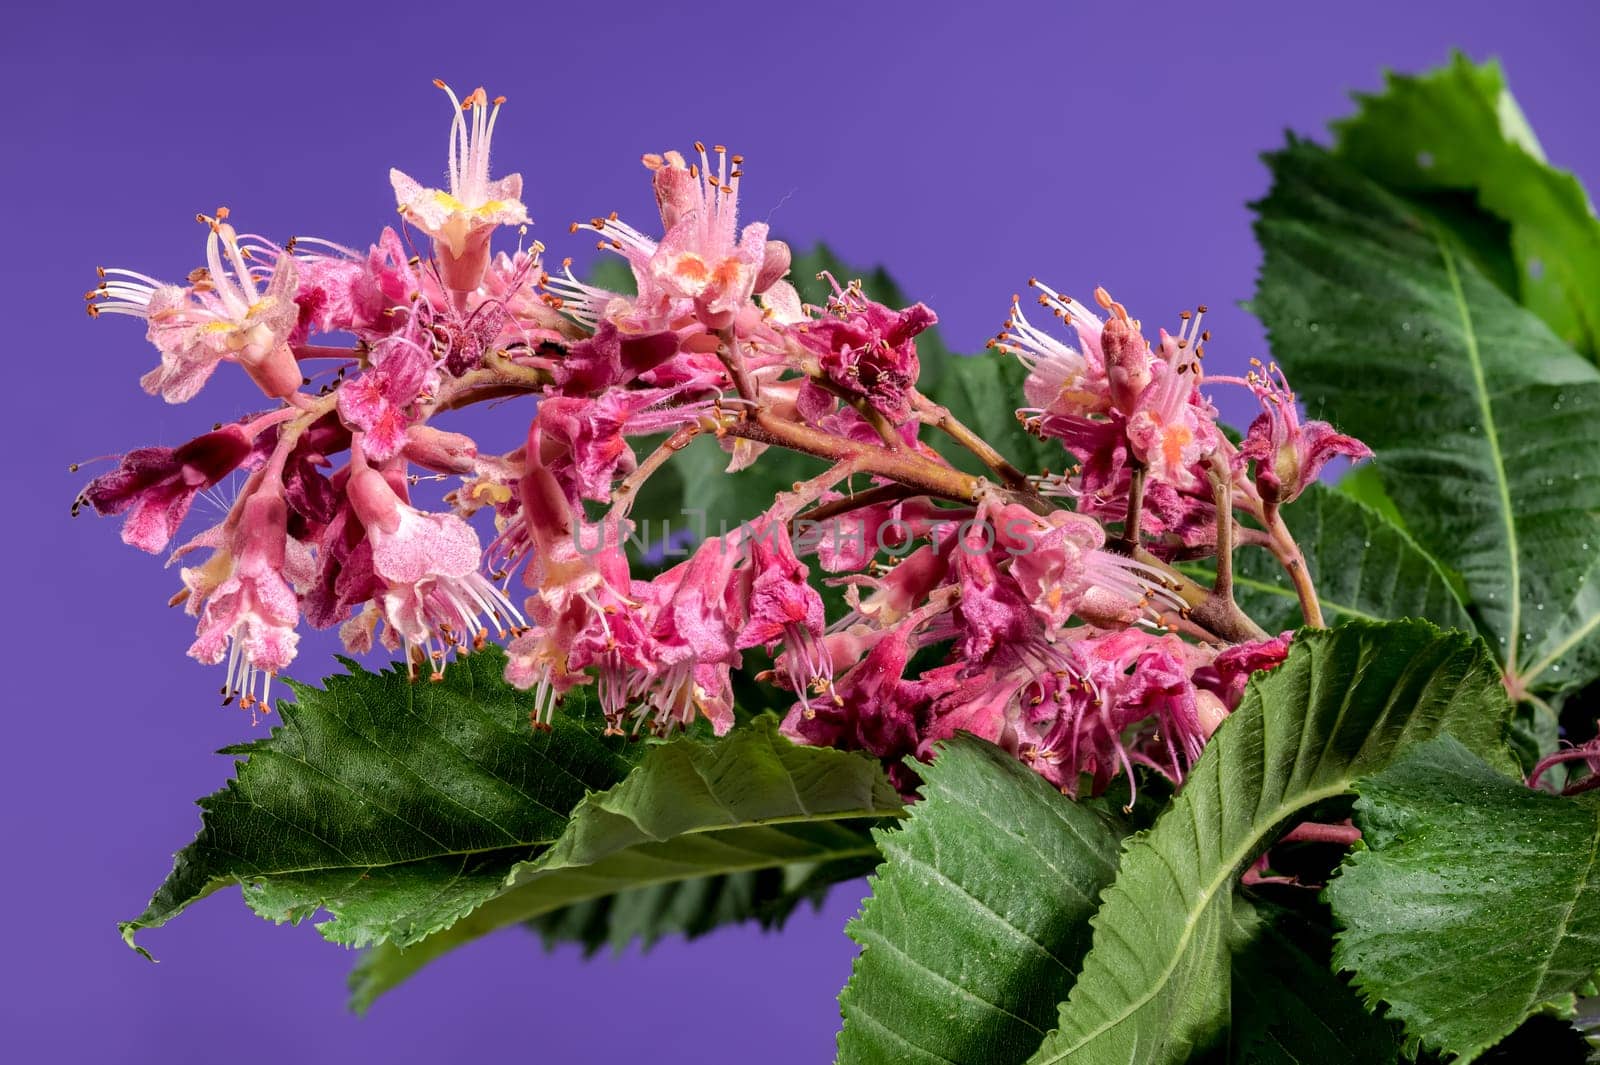 Blooming red horse-chestnut flowers on a purple background by Multipedia